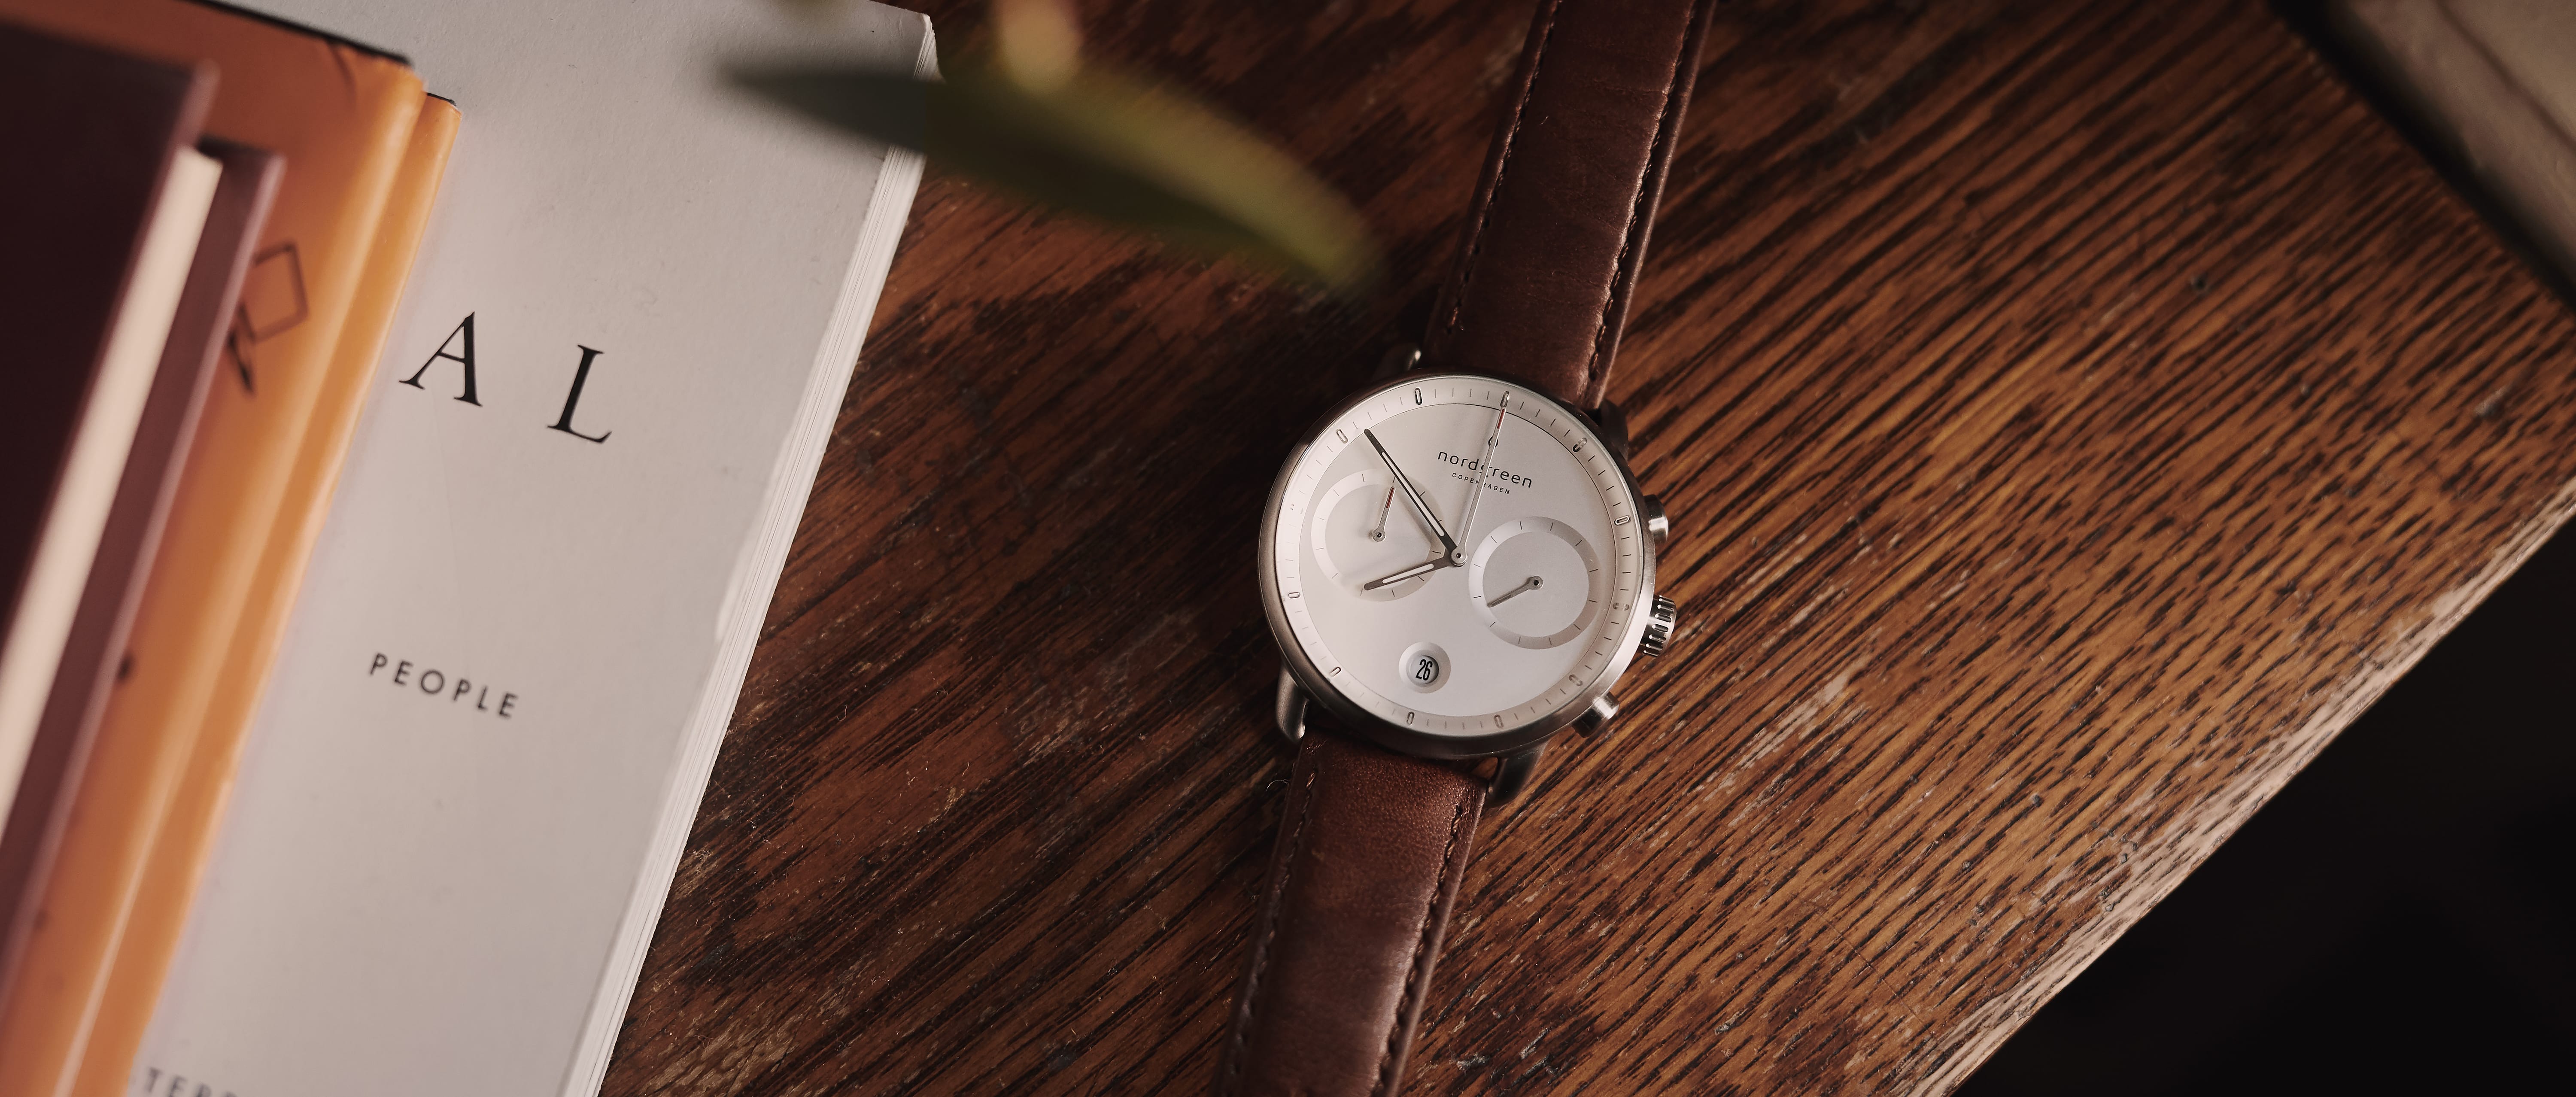 Nordgreen Watch with Brown Leather Strap & White Interface Laid on a Wooden Surface